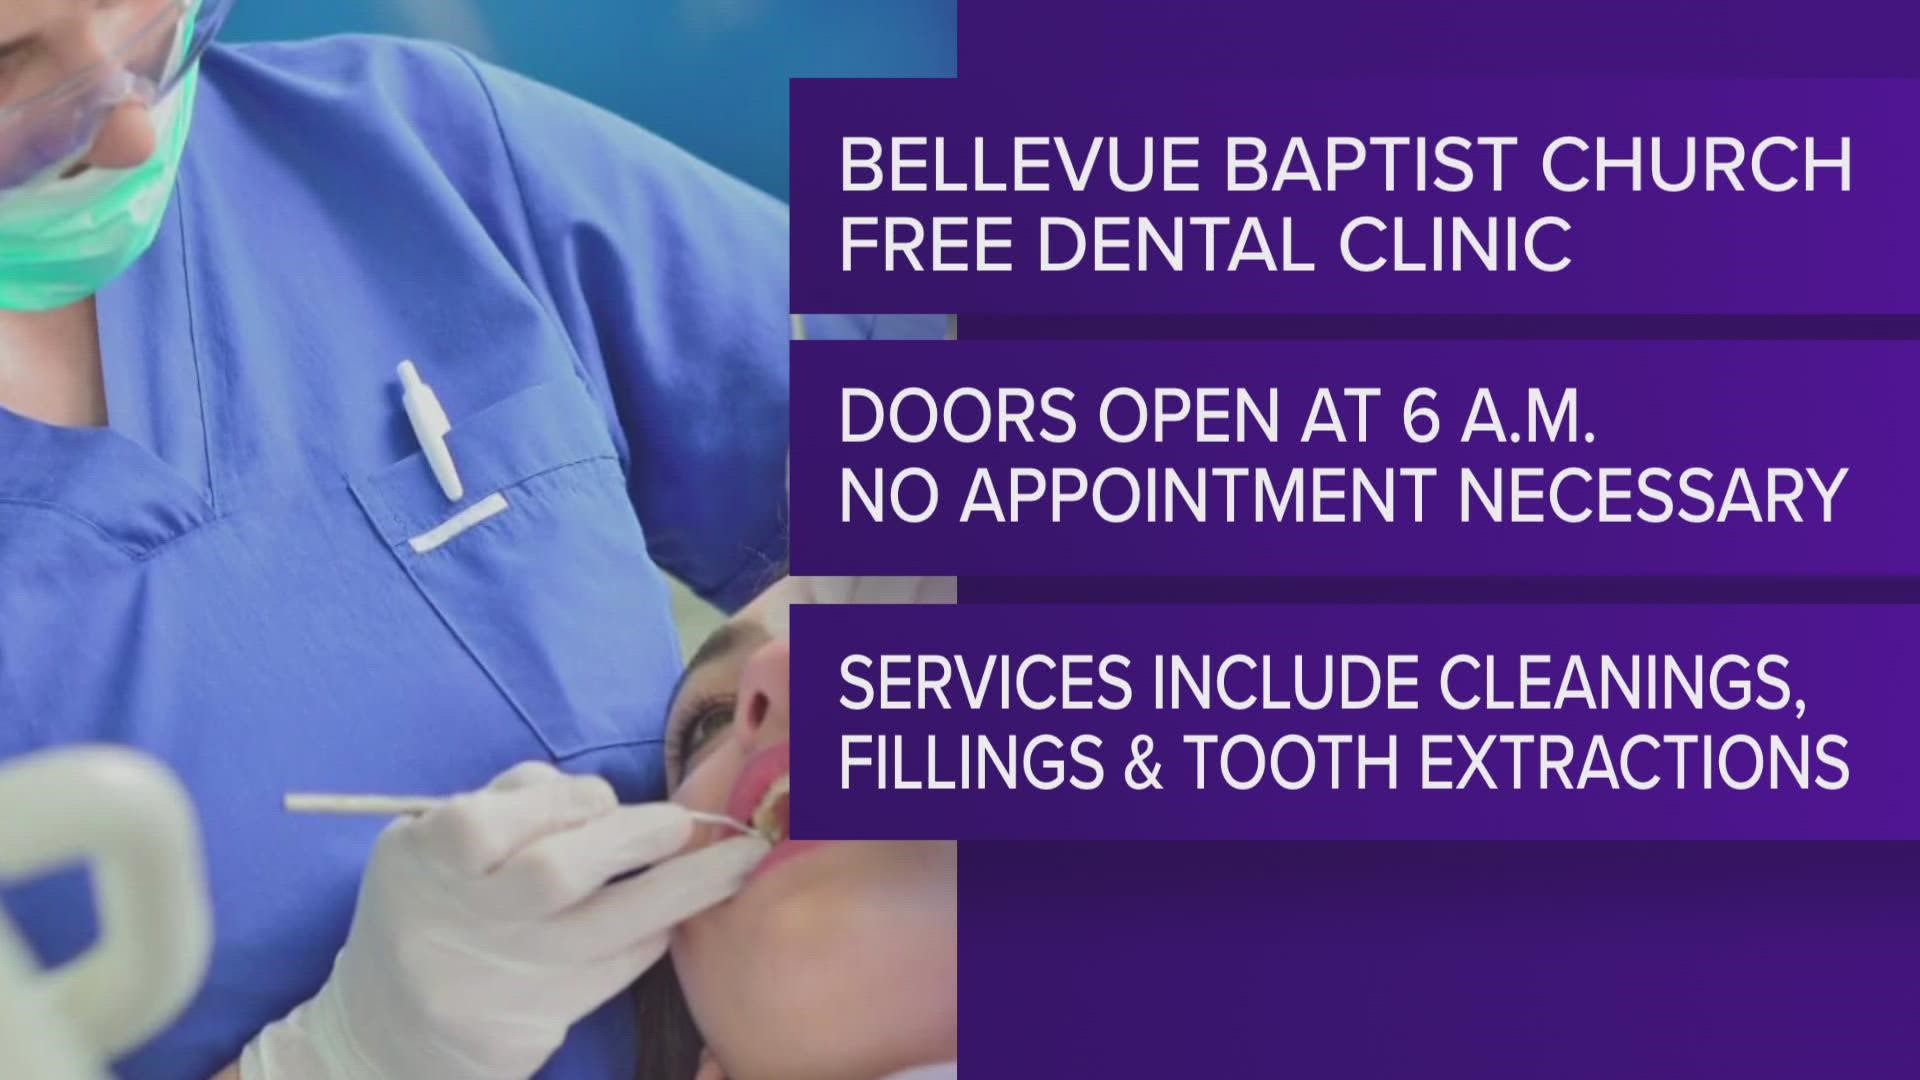 According to Christian Mobile Dental Clinic, no appointments are required, and everyone is eligible to receive free dental services.